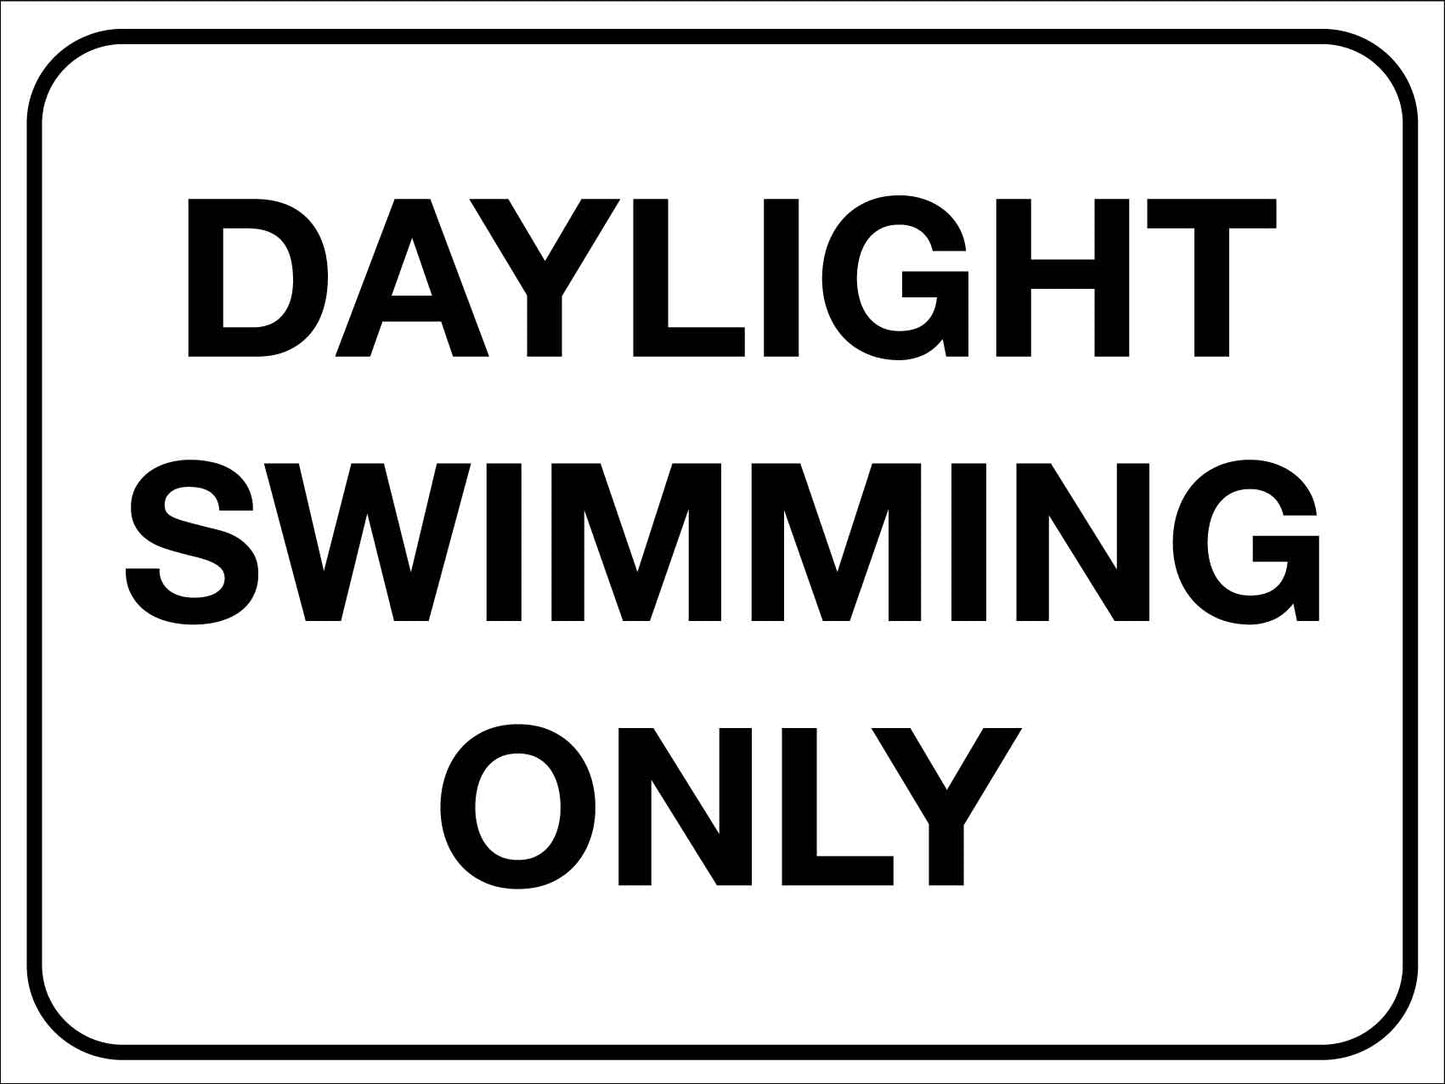 Daylight Swimming Only Sign